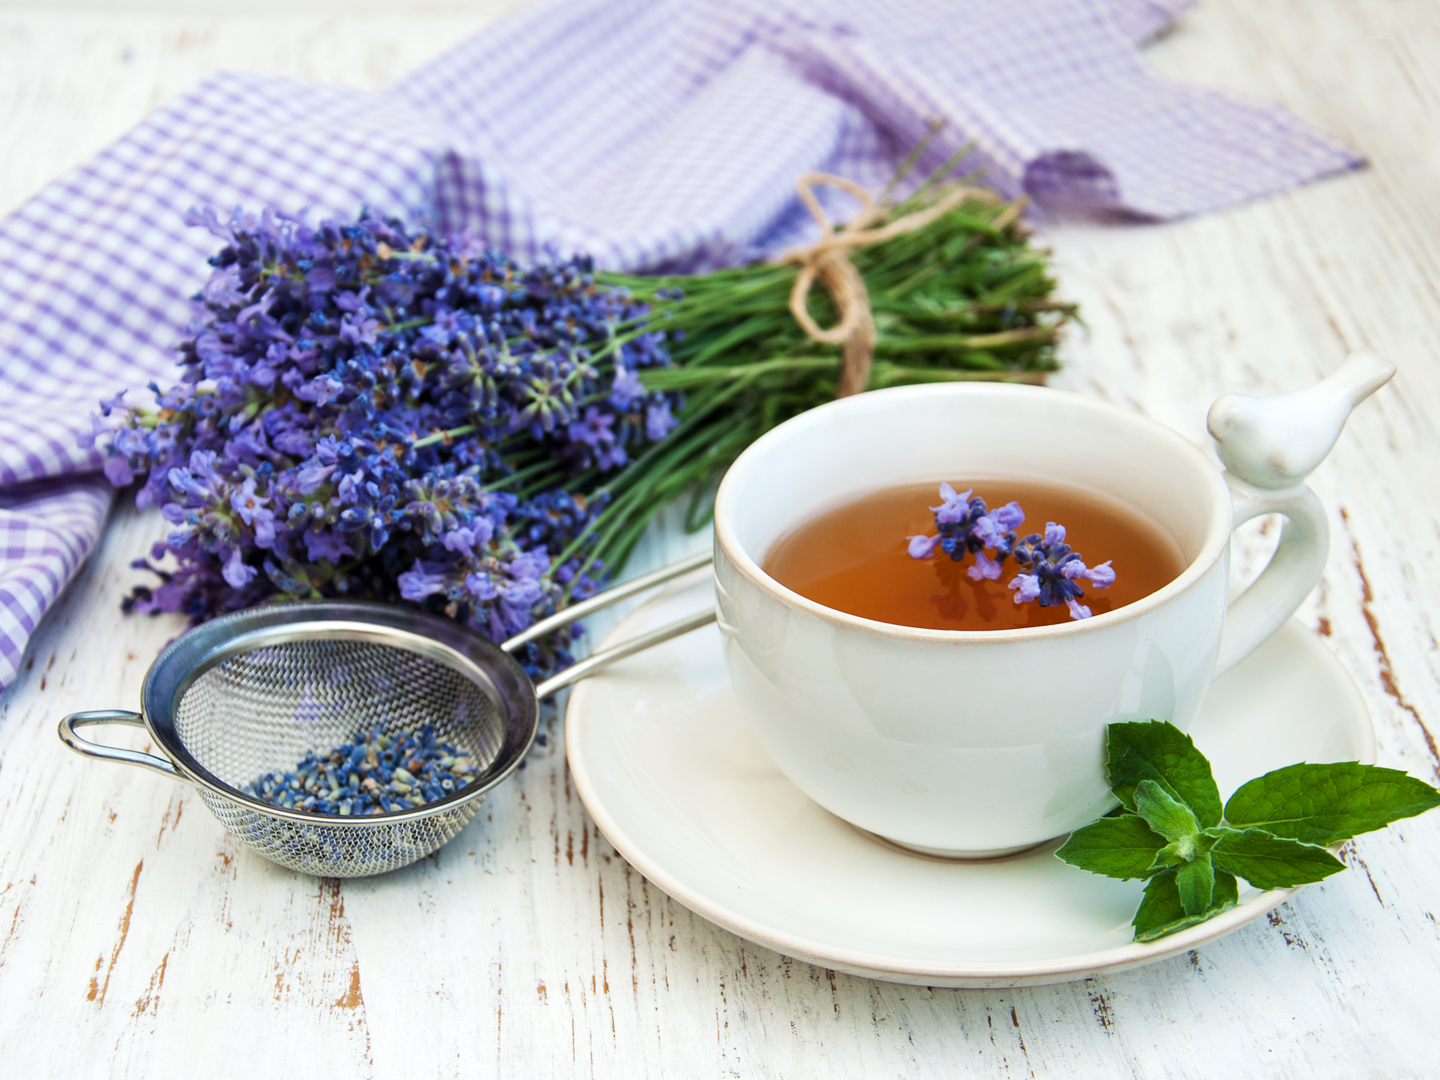 cooking with spices: lavender - dr. weil's healthy kitchen